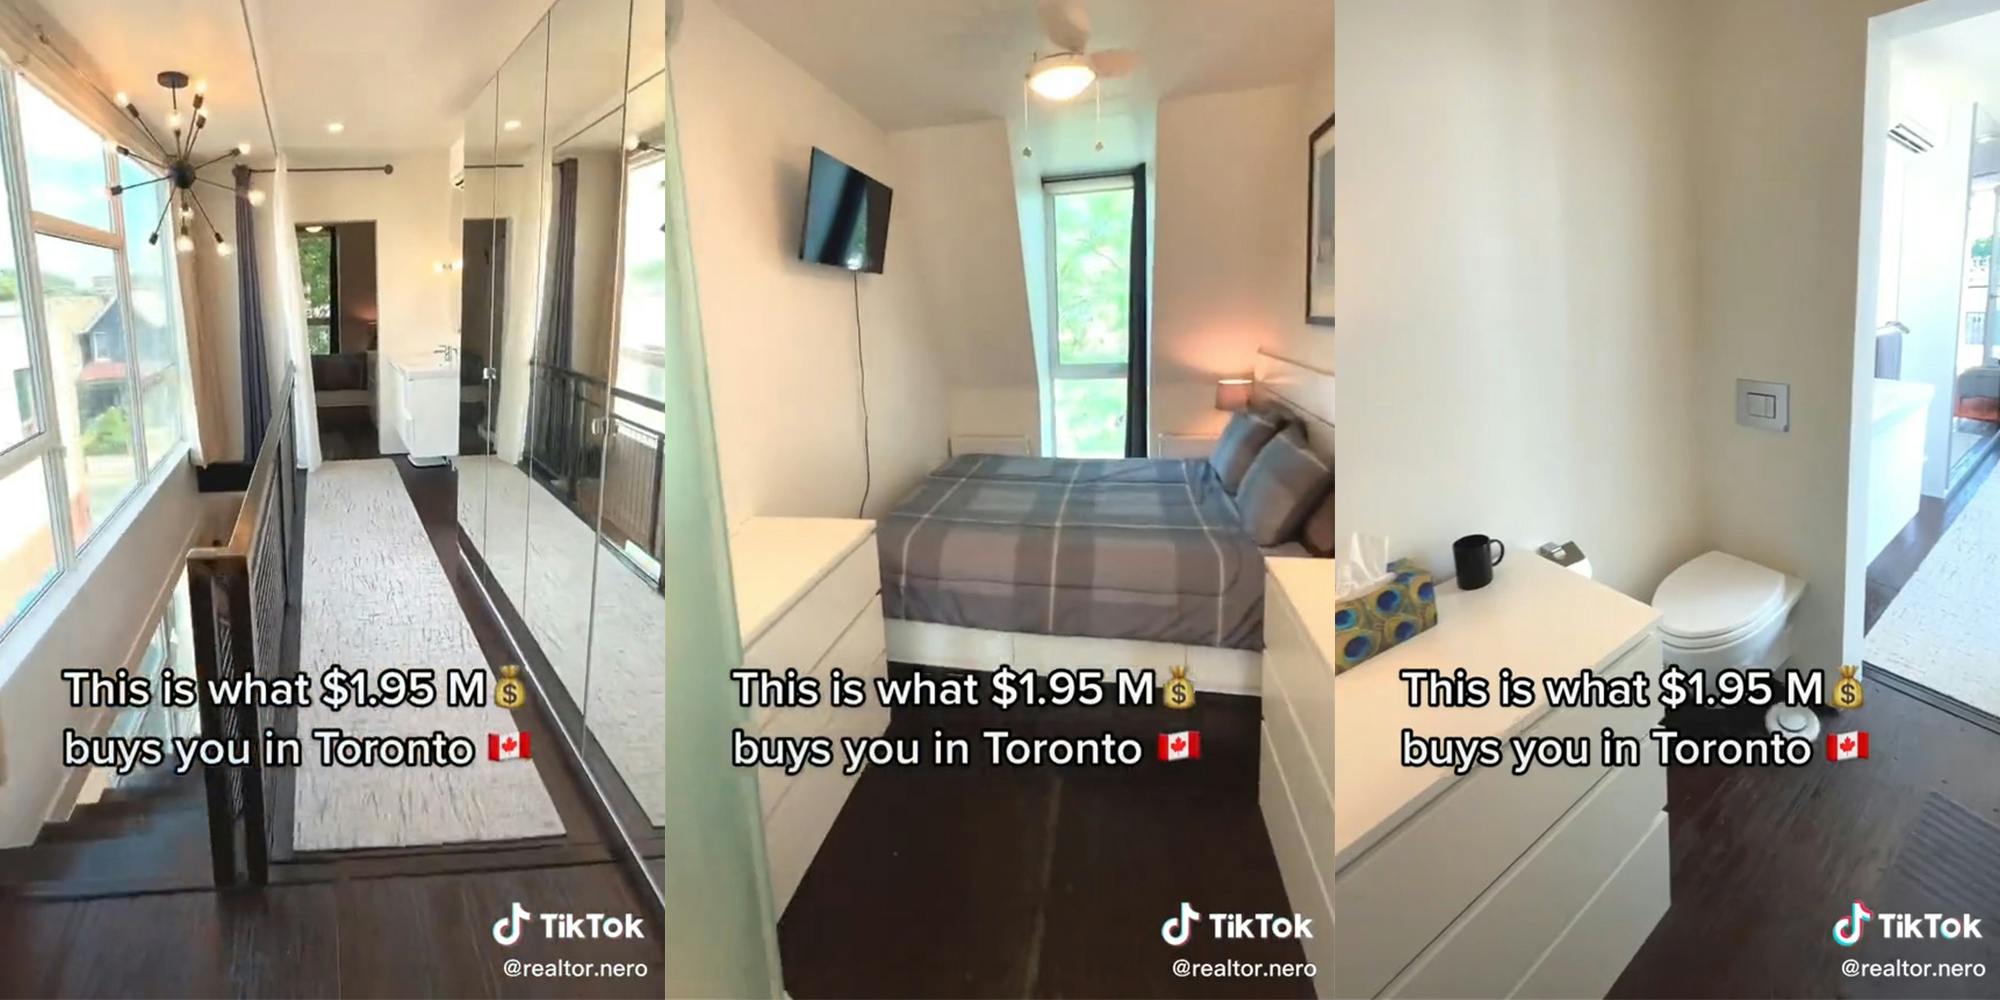 small apartment with toilet in bedroom and caption "This is what $1.95 M buys you in Toronto"